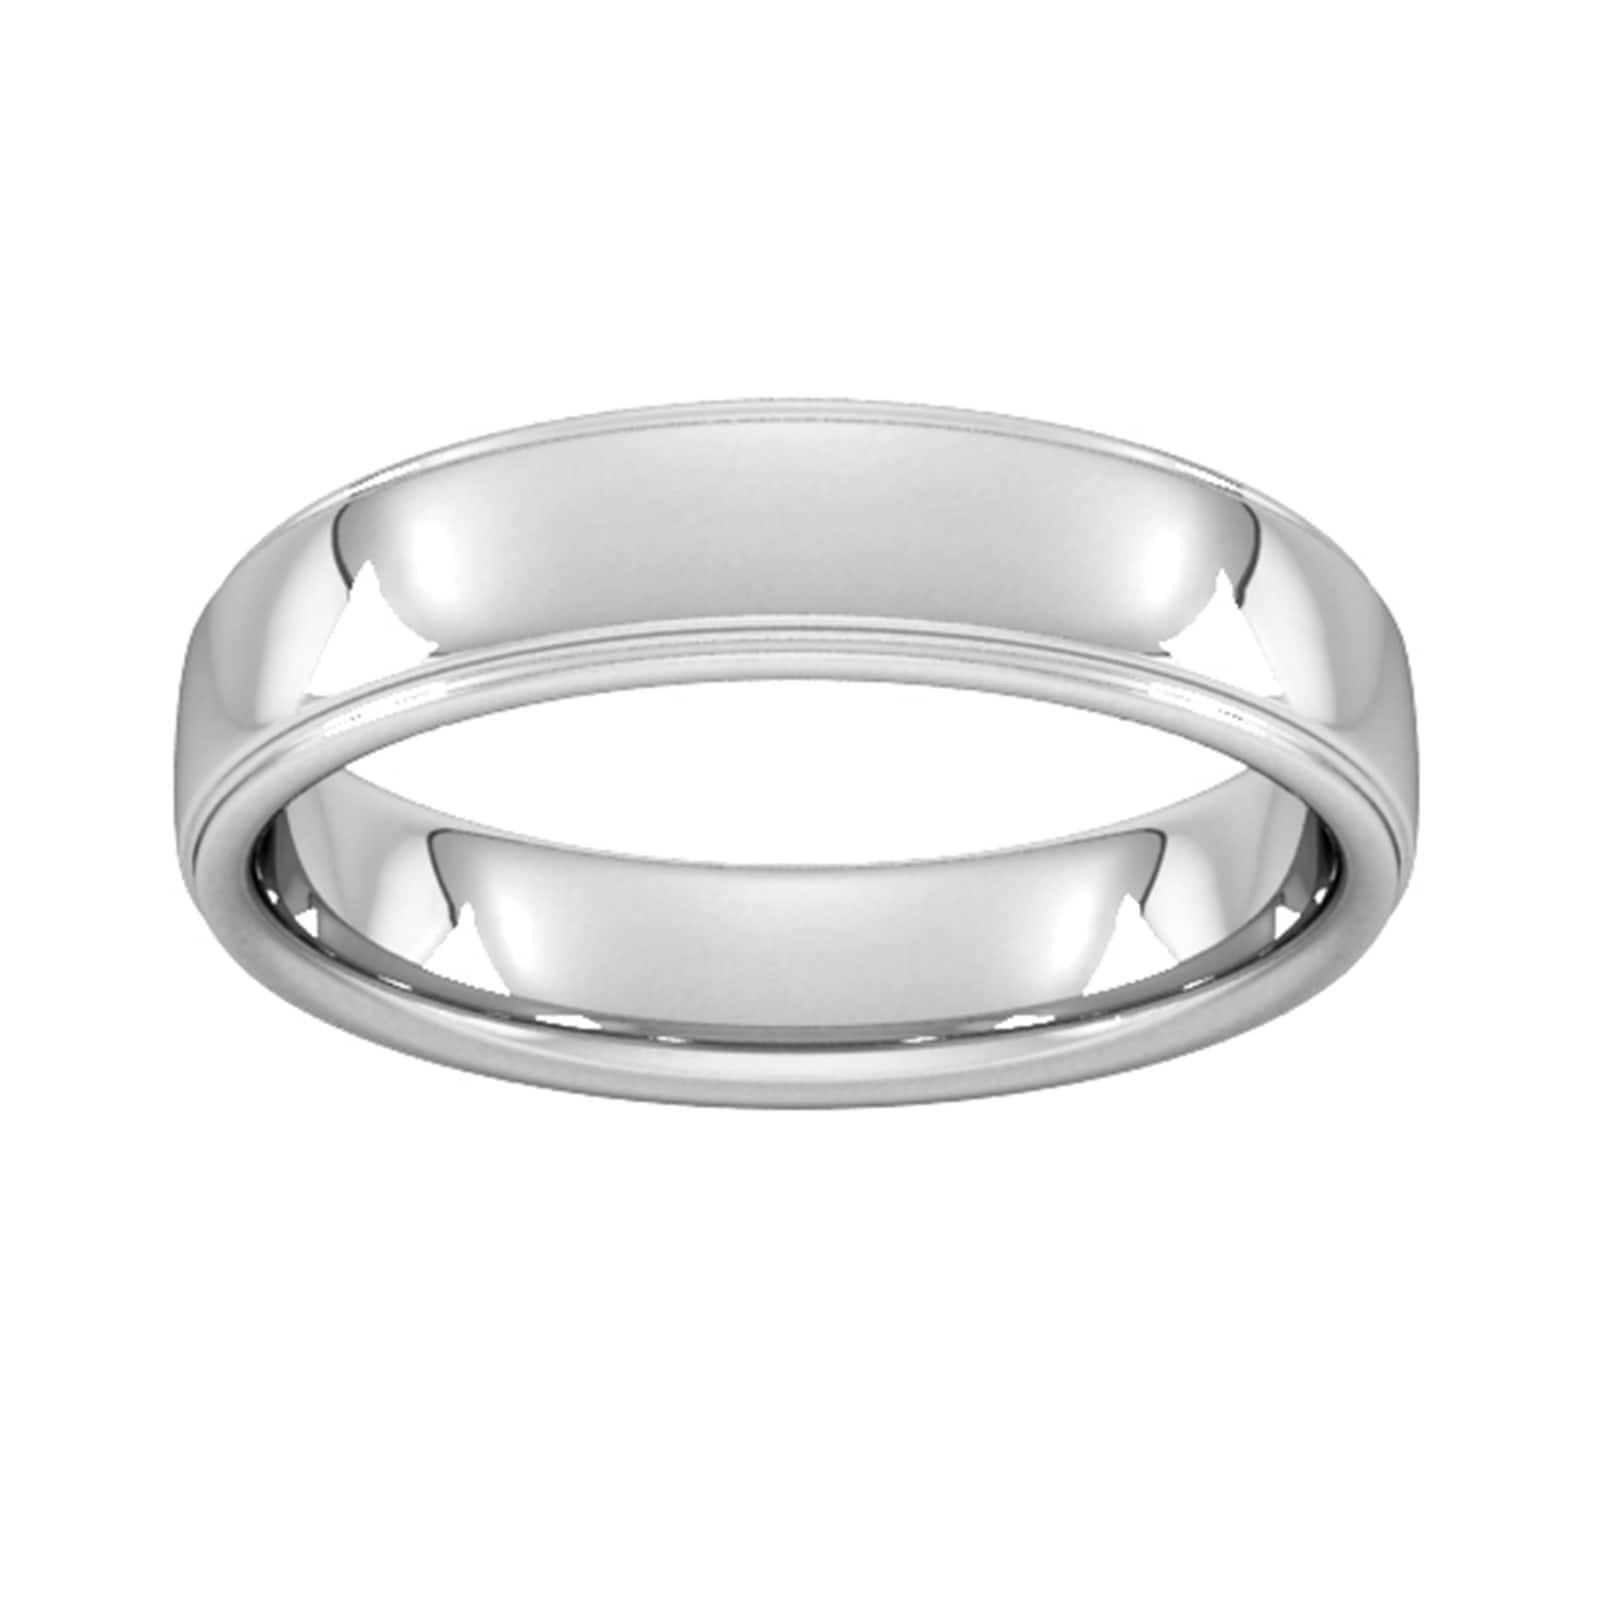 5mm Traditional Court Standard Polished Finish With Grooves Wedding Ring In 18 Carat White Gold - Ring Size X